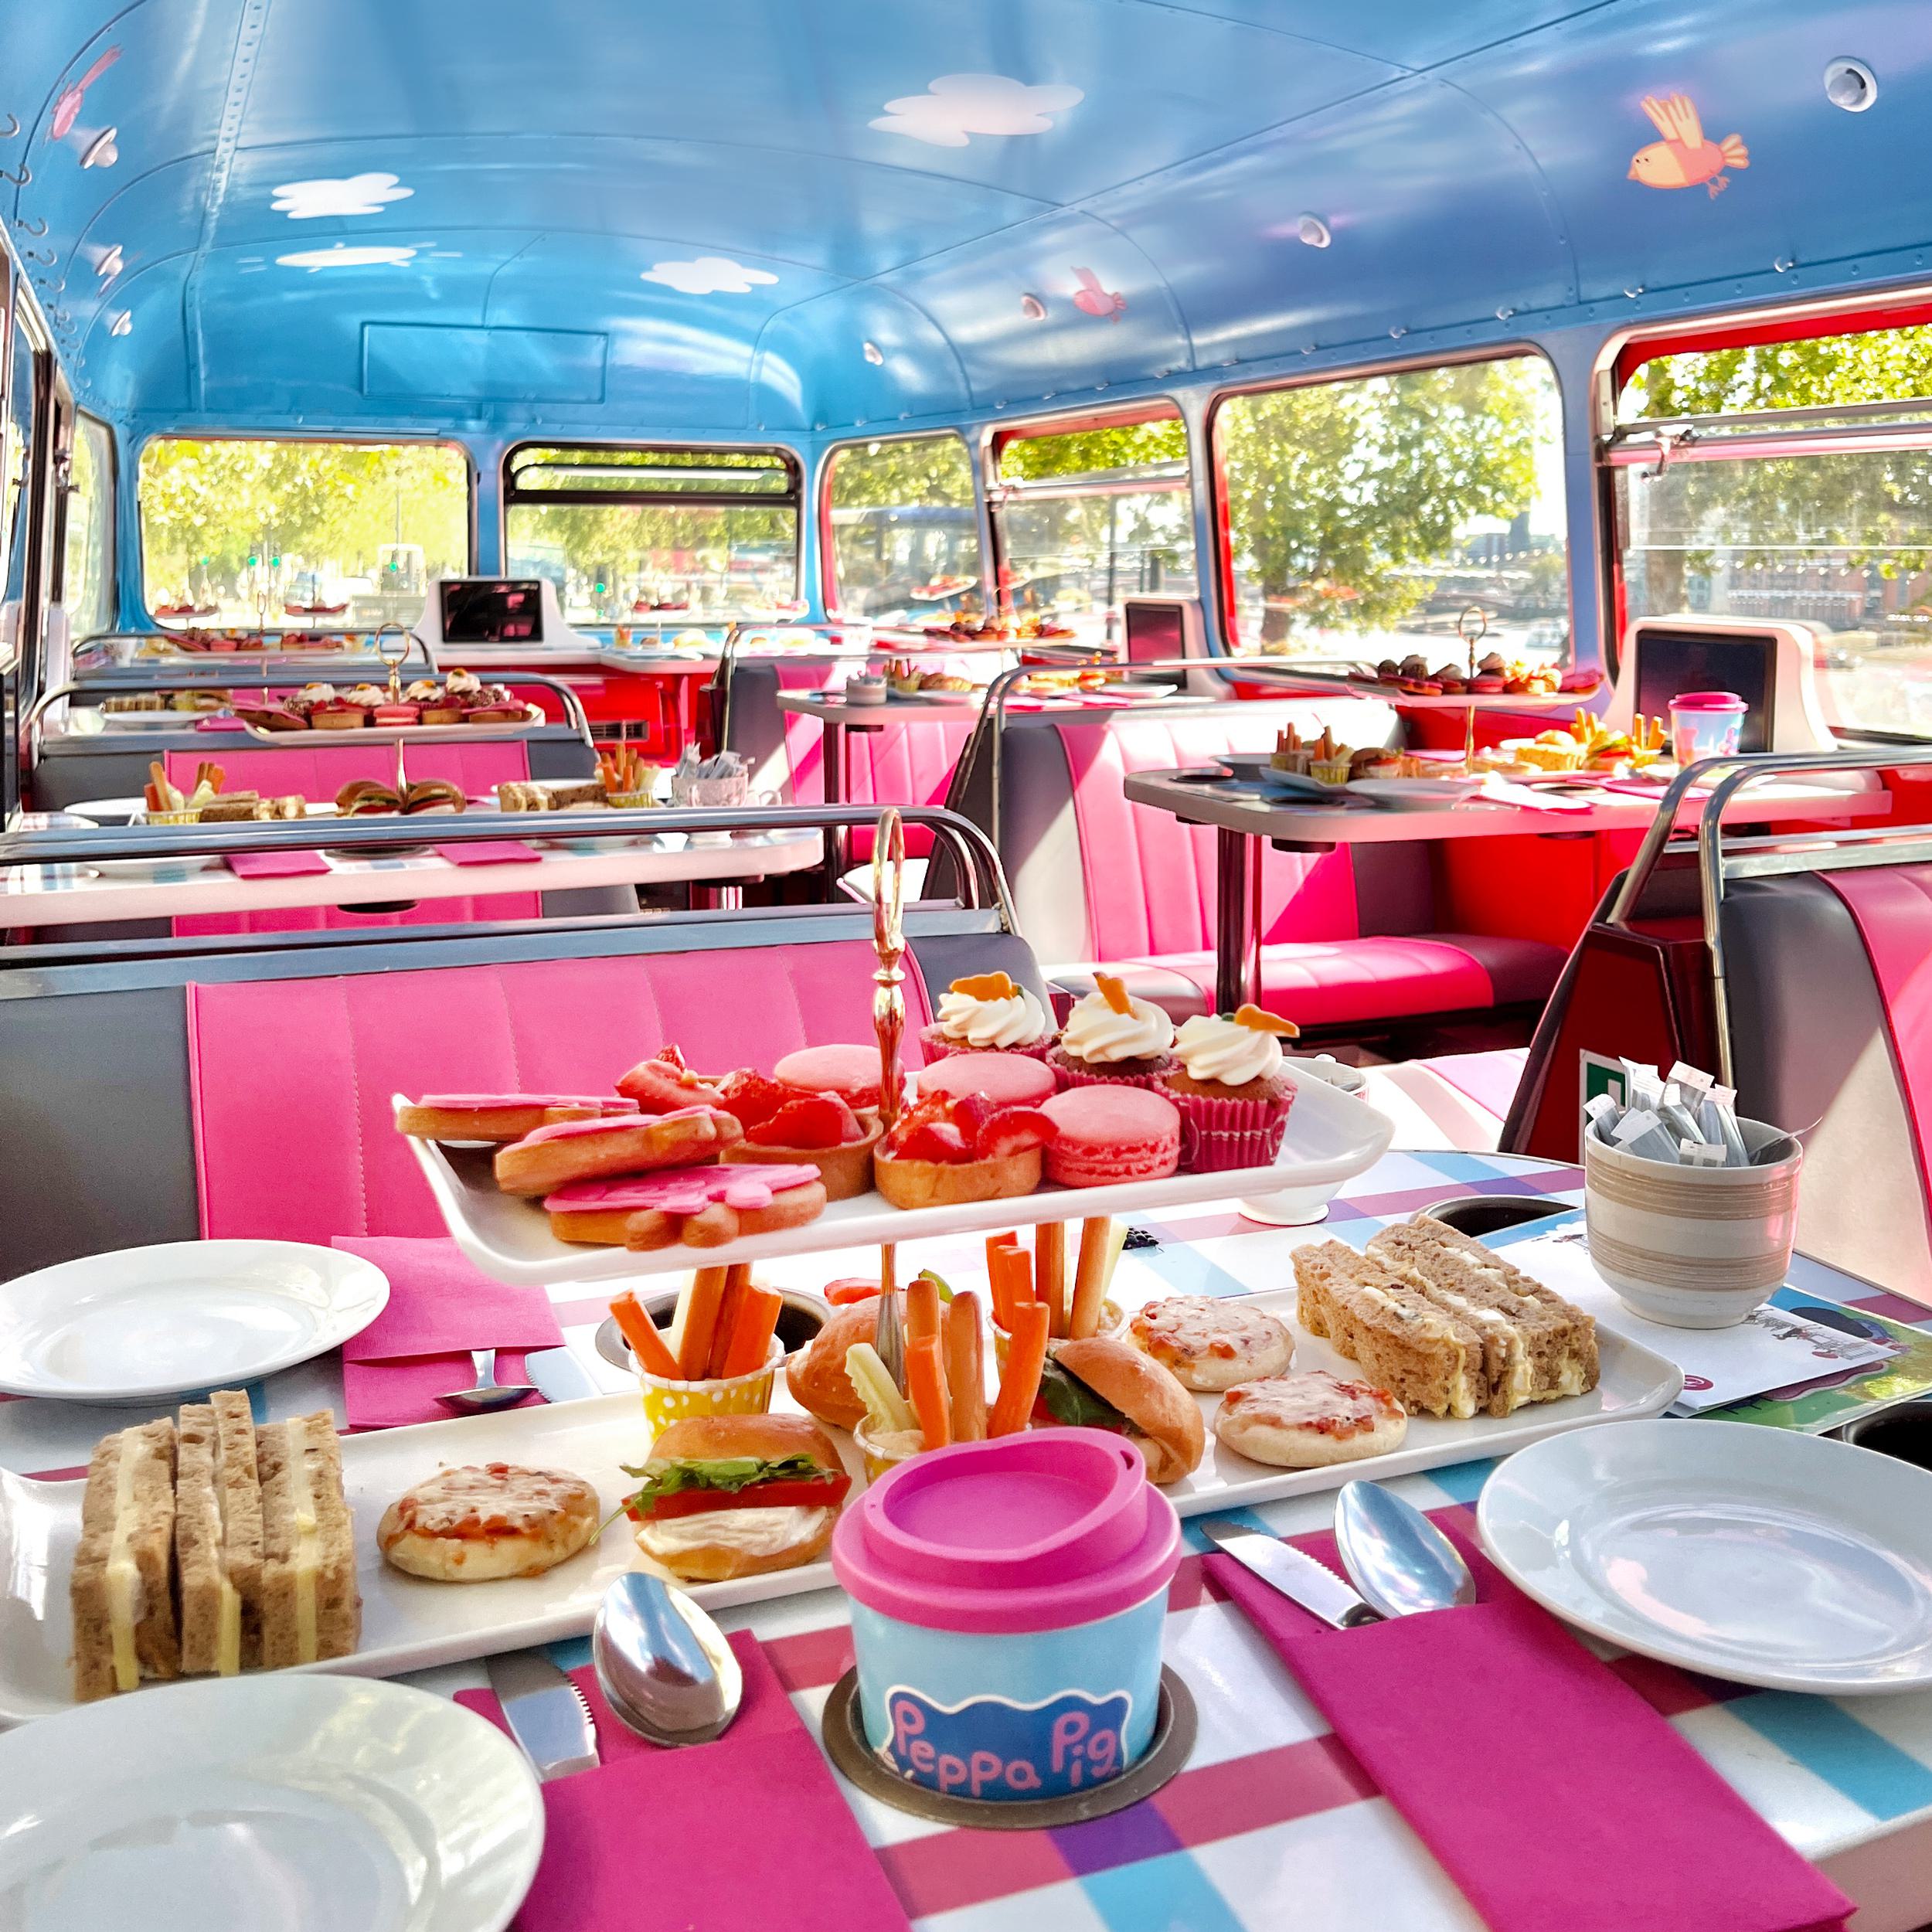 Things to do in London in May & June: Peppa Pig Afternoon Tea Bus Tour